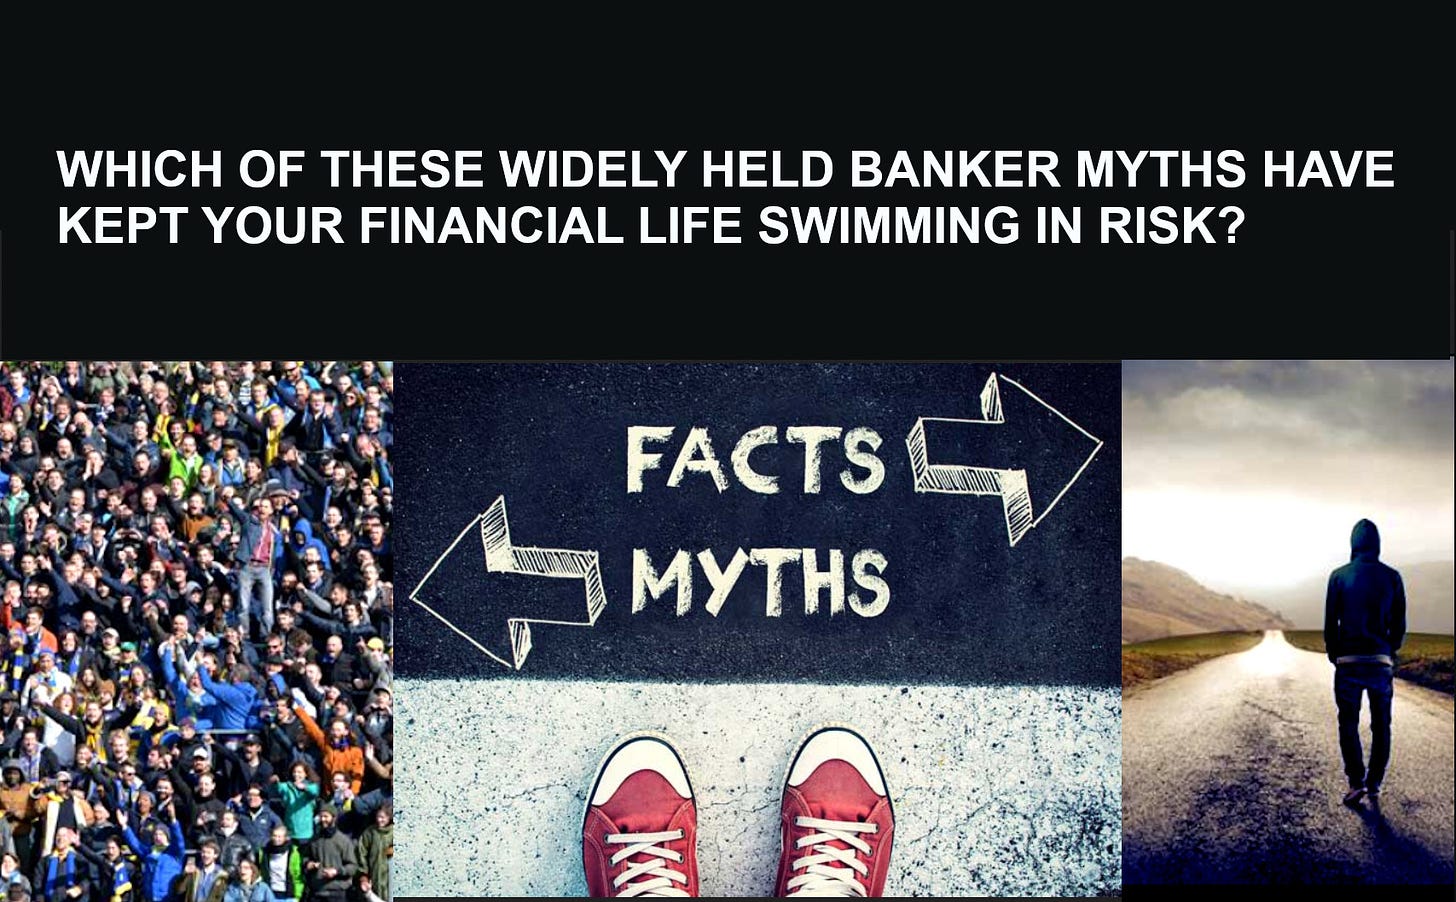 Most widely believed finance and banking myths